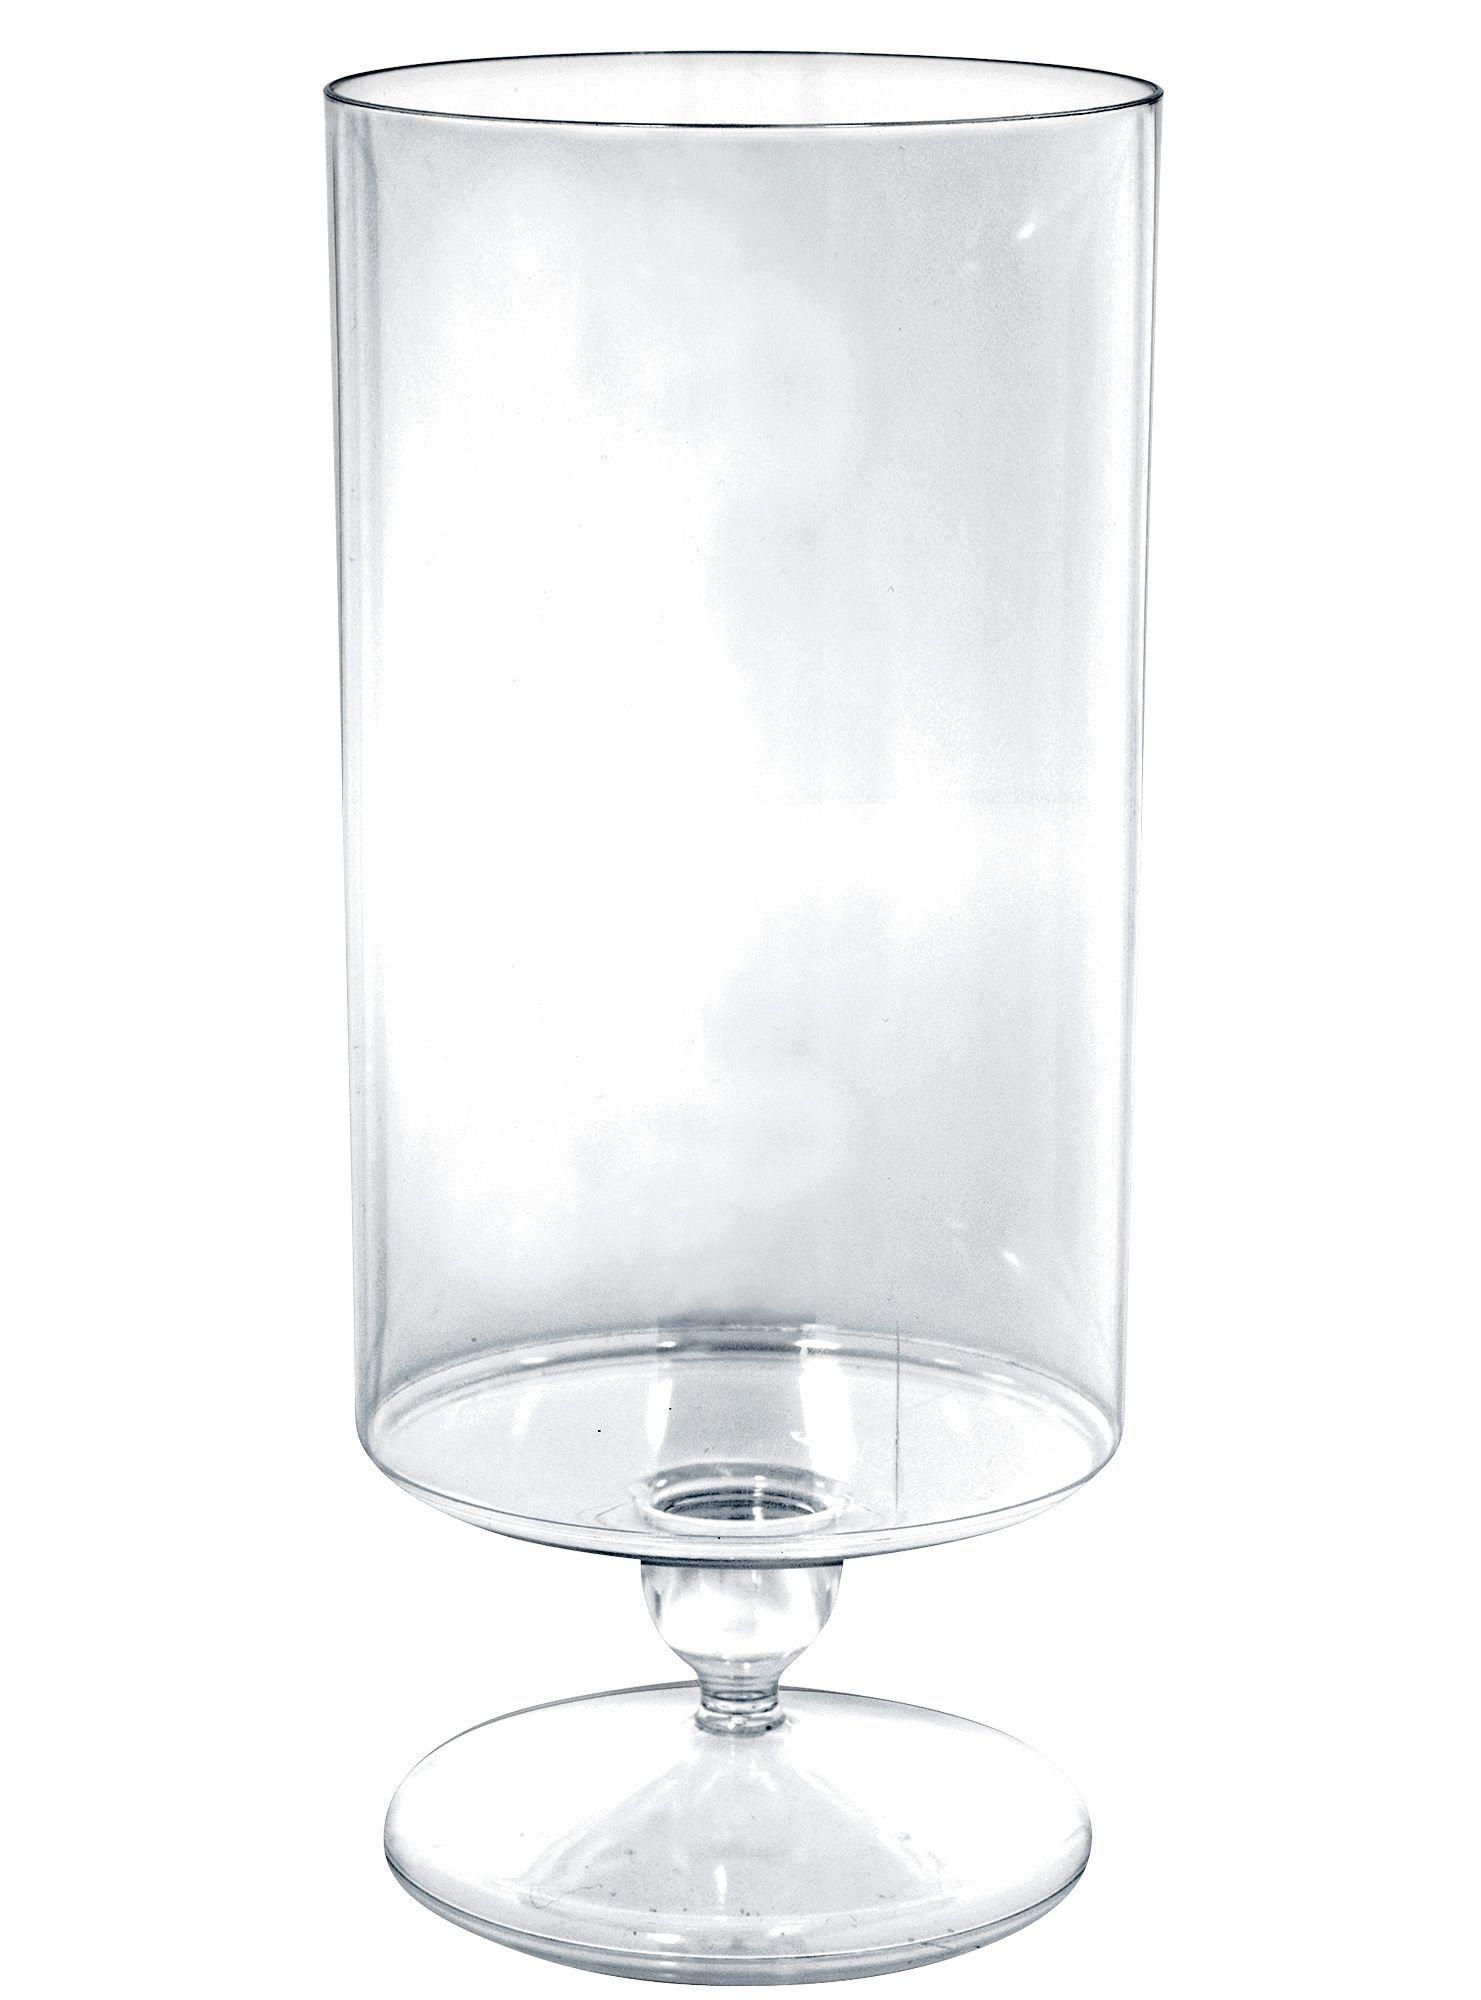 Tall Plastic Container Large